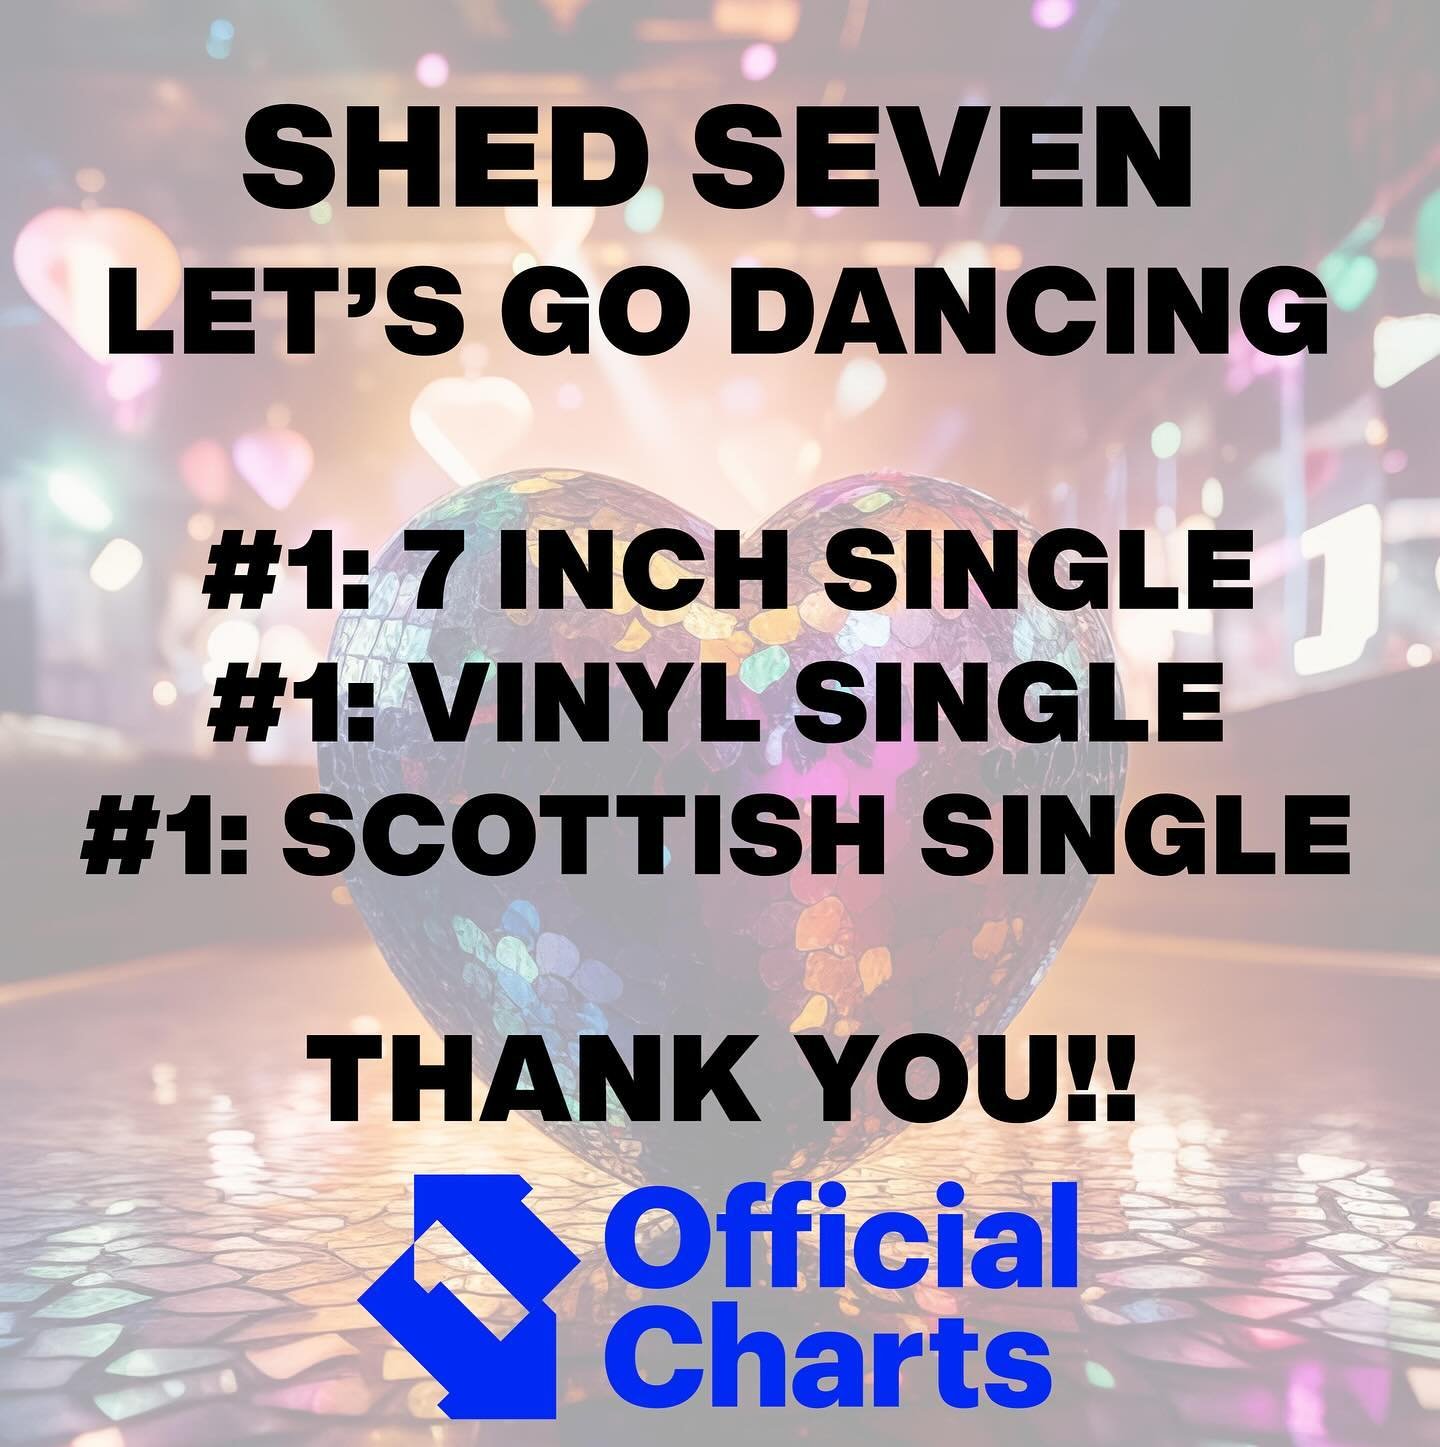 @shedsevenofficial have struck gold again! This time in the single charts for &lsquo;Let&rsquo;s Go Dancing&rsquo; which is sitting at #1 - 7&rdquo; singles, #1 - Vinyl singles, #1 - Scottish singles &amp; #2 Physical singles. Stream &lsquo;Let&rsquo